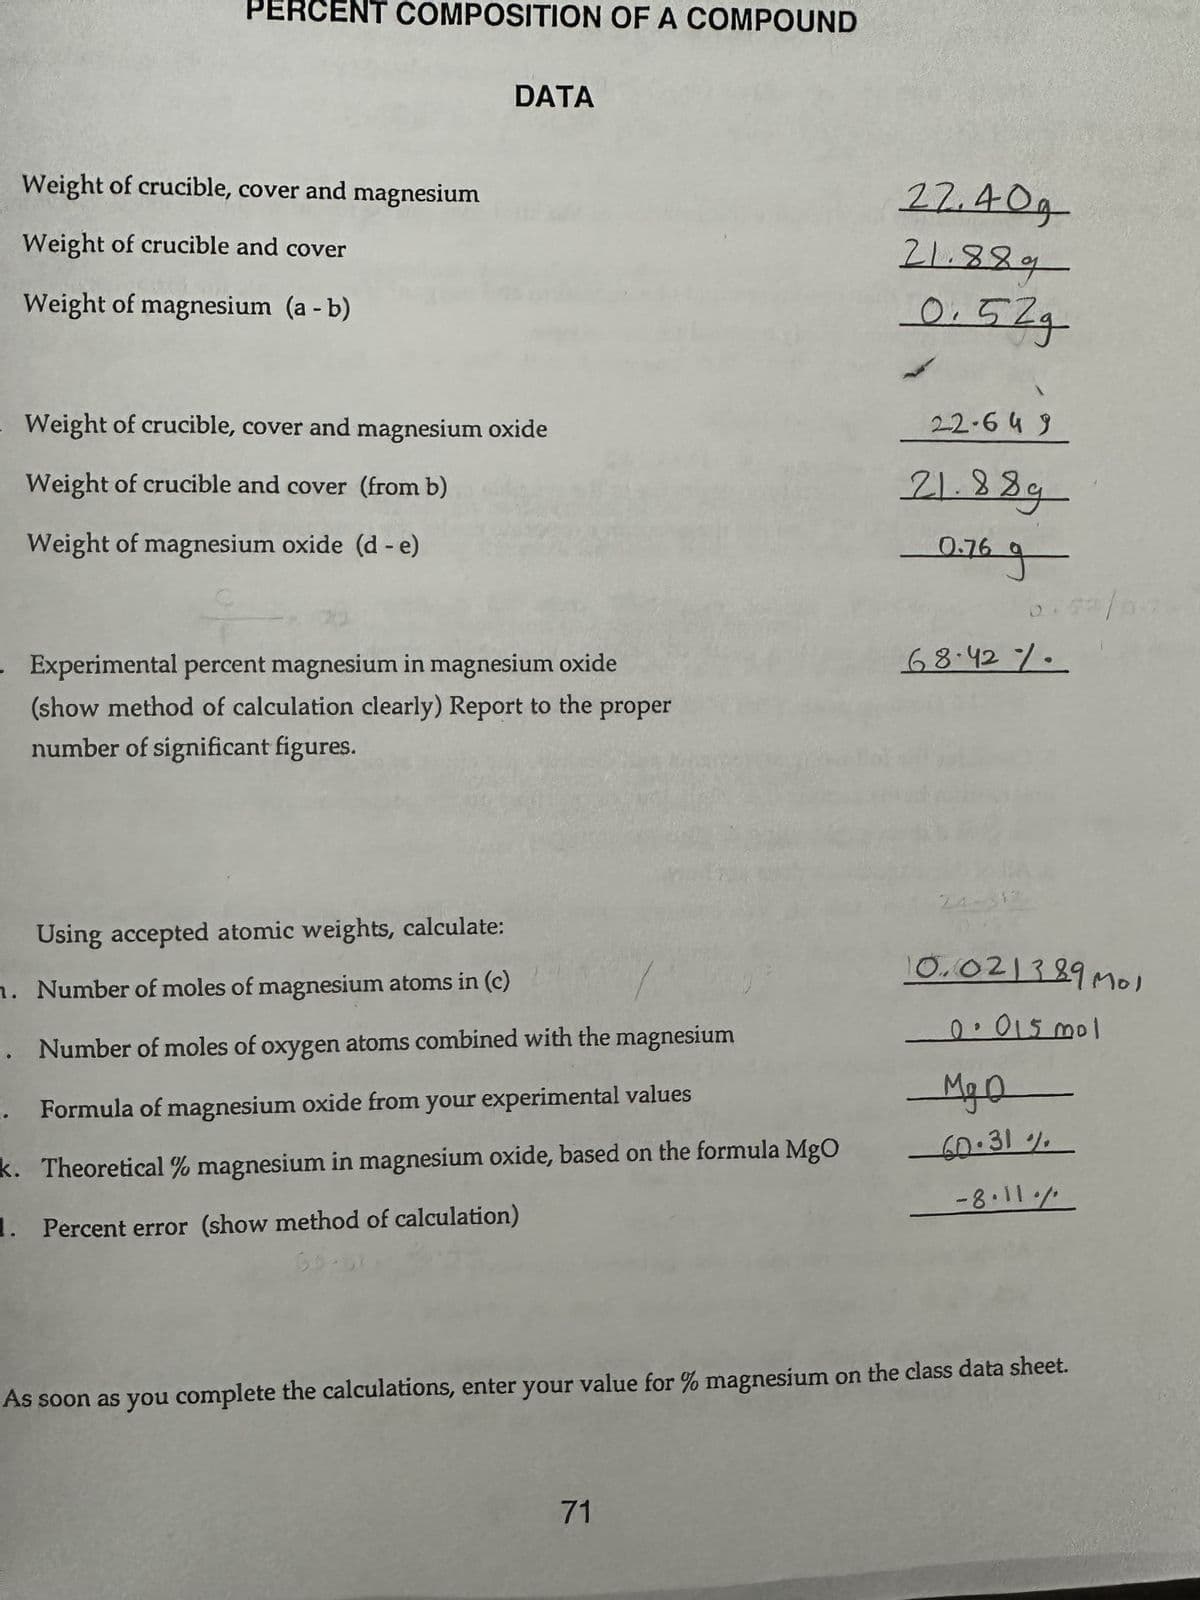 PERCENT COMPOSITION OF A COMPOUND
Weight of crucible, cover and magnesium
Weight of crucible and cover
Weight of magnesium (a - b)
DATA
. Weight of crucible, cover and magnesium oxide
Weight of crucible and cover (from b)
Weight of magnesium oxide (d - e)
Experimental percent magnesium in magnesium oxide
(show method of calculation clearly) Report to the proper
number of significant figures.
Using accepted atomic weights, calculate:
n. Number of moles of magnesium atoms in (c)
.. Number of moles of oxygen atoms combined with the magnesium
i. Formula of magnesium oxide from your experimental values
k. Theoretical % magnesium in magnesium oxide, based on the formula MgO
1. Percent error (show method of calculation)
55.51
22.40g
21.889
0.52g
71
22-649
21.88g
0.769
68.42%.
24-312
10.021389 Mol
0.015 mol
Mg
60.31%
-8.11./
As soon as you complete the calculations, enter your value for % magnesium on the class data sheet.